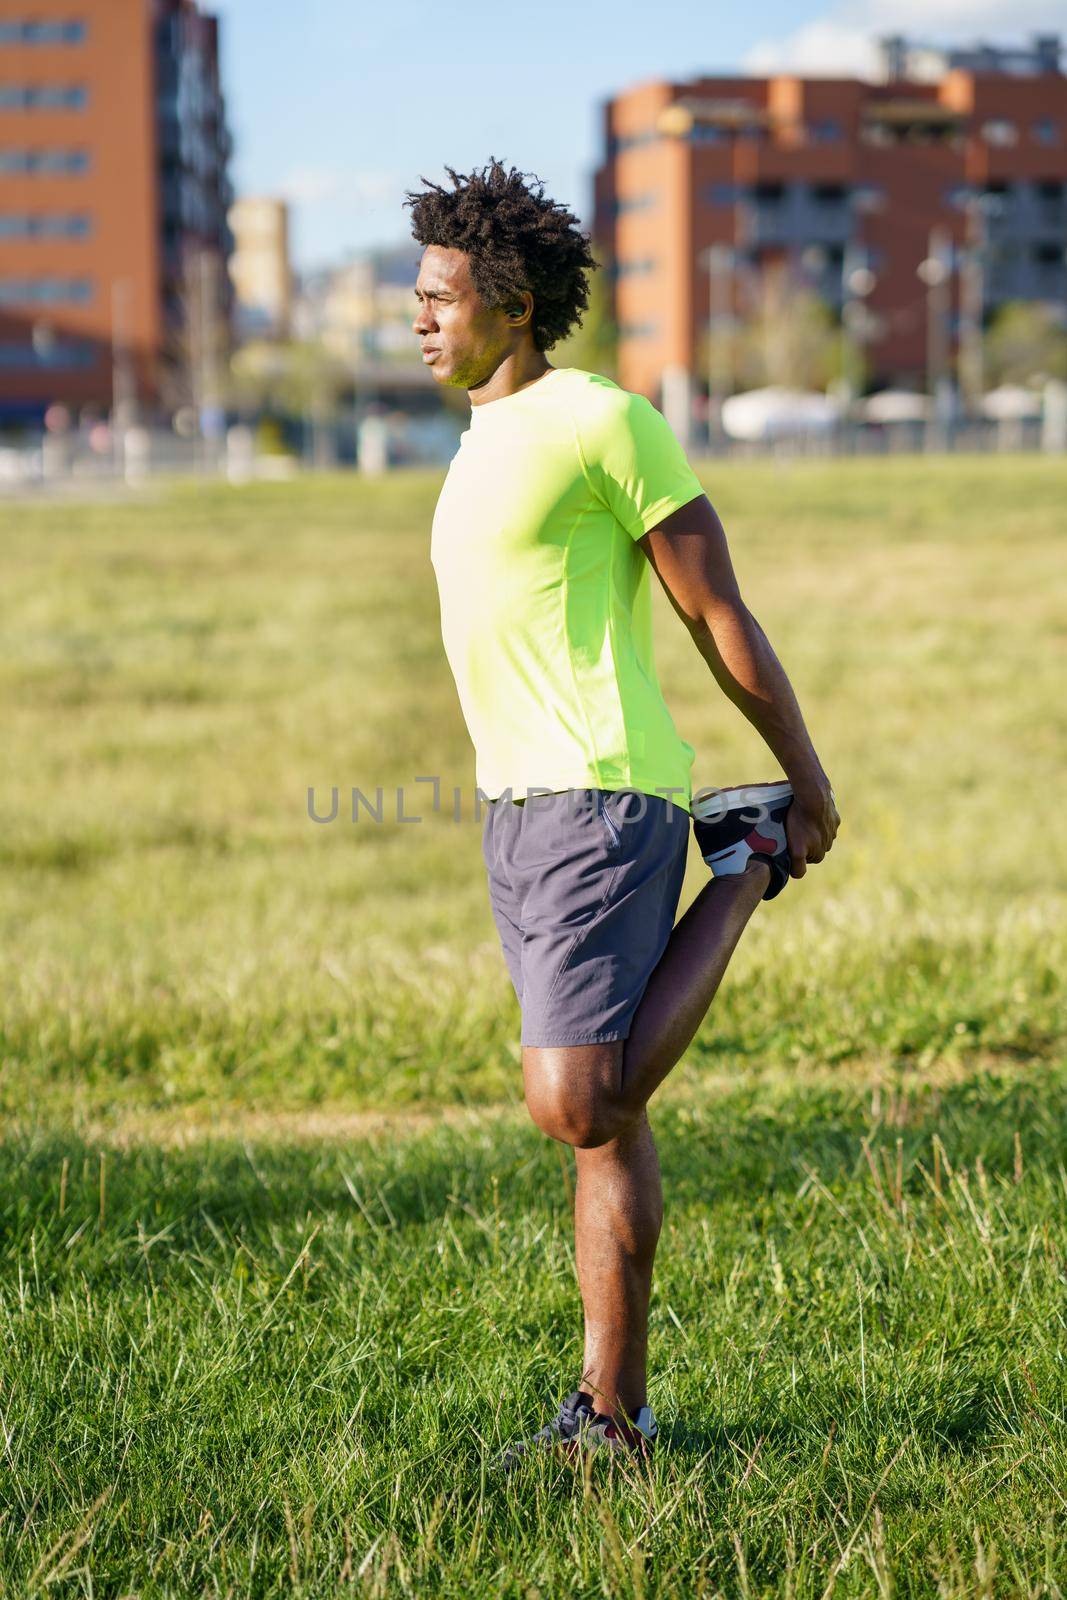 Black man stretching his quadriceps after running outdoors. Young male exercising in urban background.